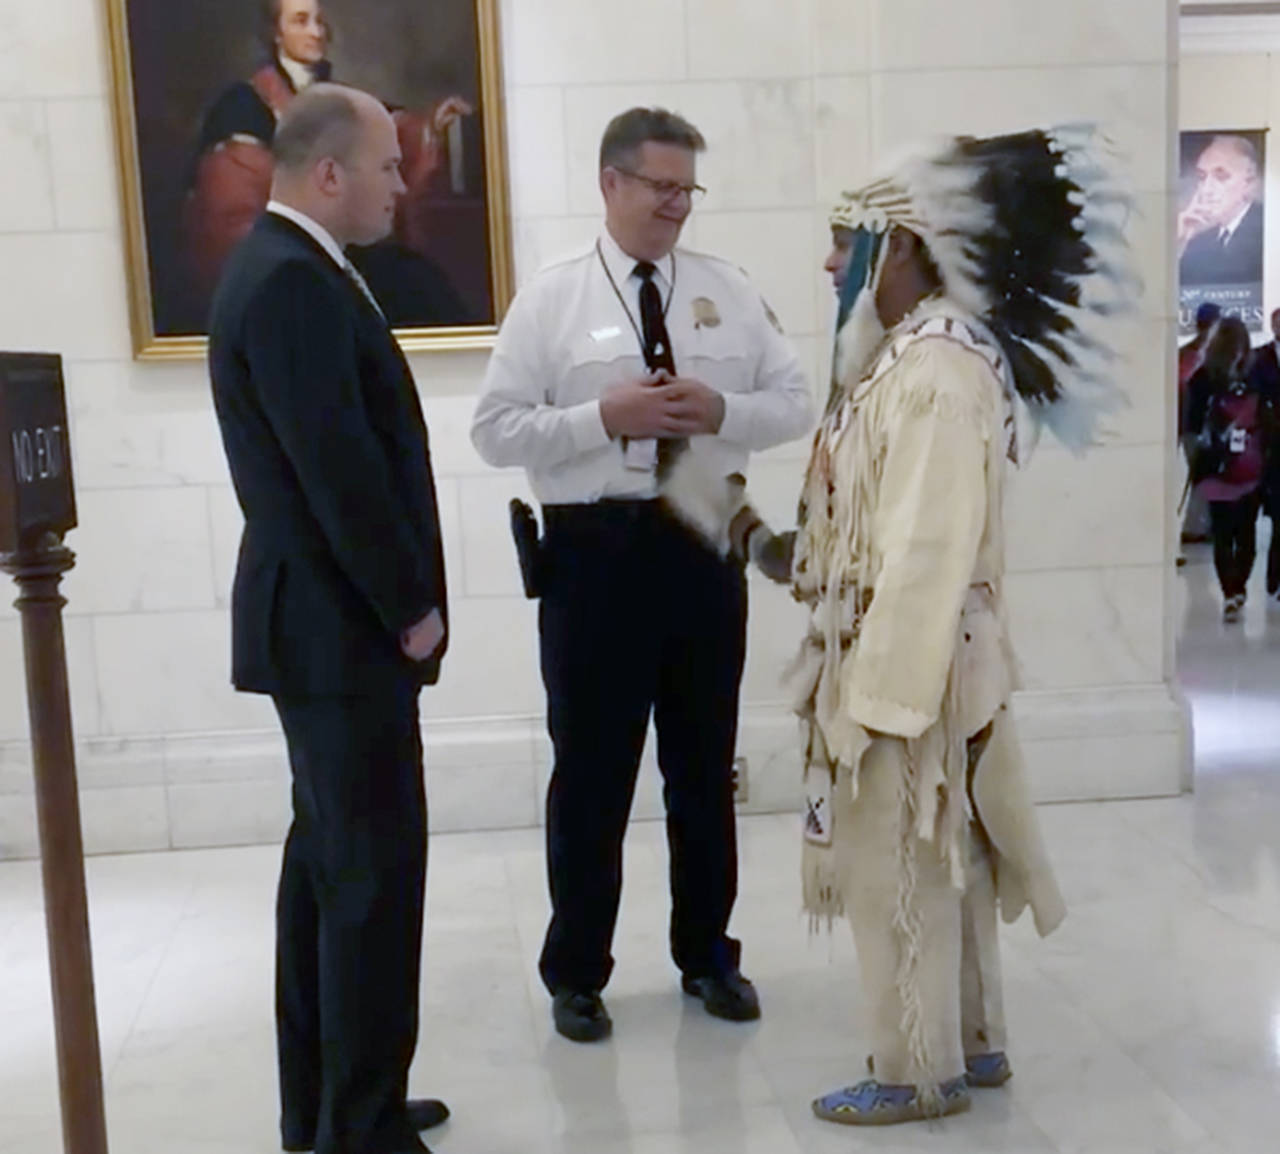 Yakama Nation Tribal Council Chairman JoDe Goudy was denied access to a U.S. Supreme Court hearing Tuesday because he wouldn’t remove his traditional feathered headdress. (JoDe Goudy’s Facebook page)